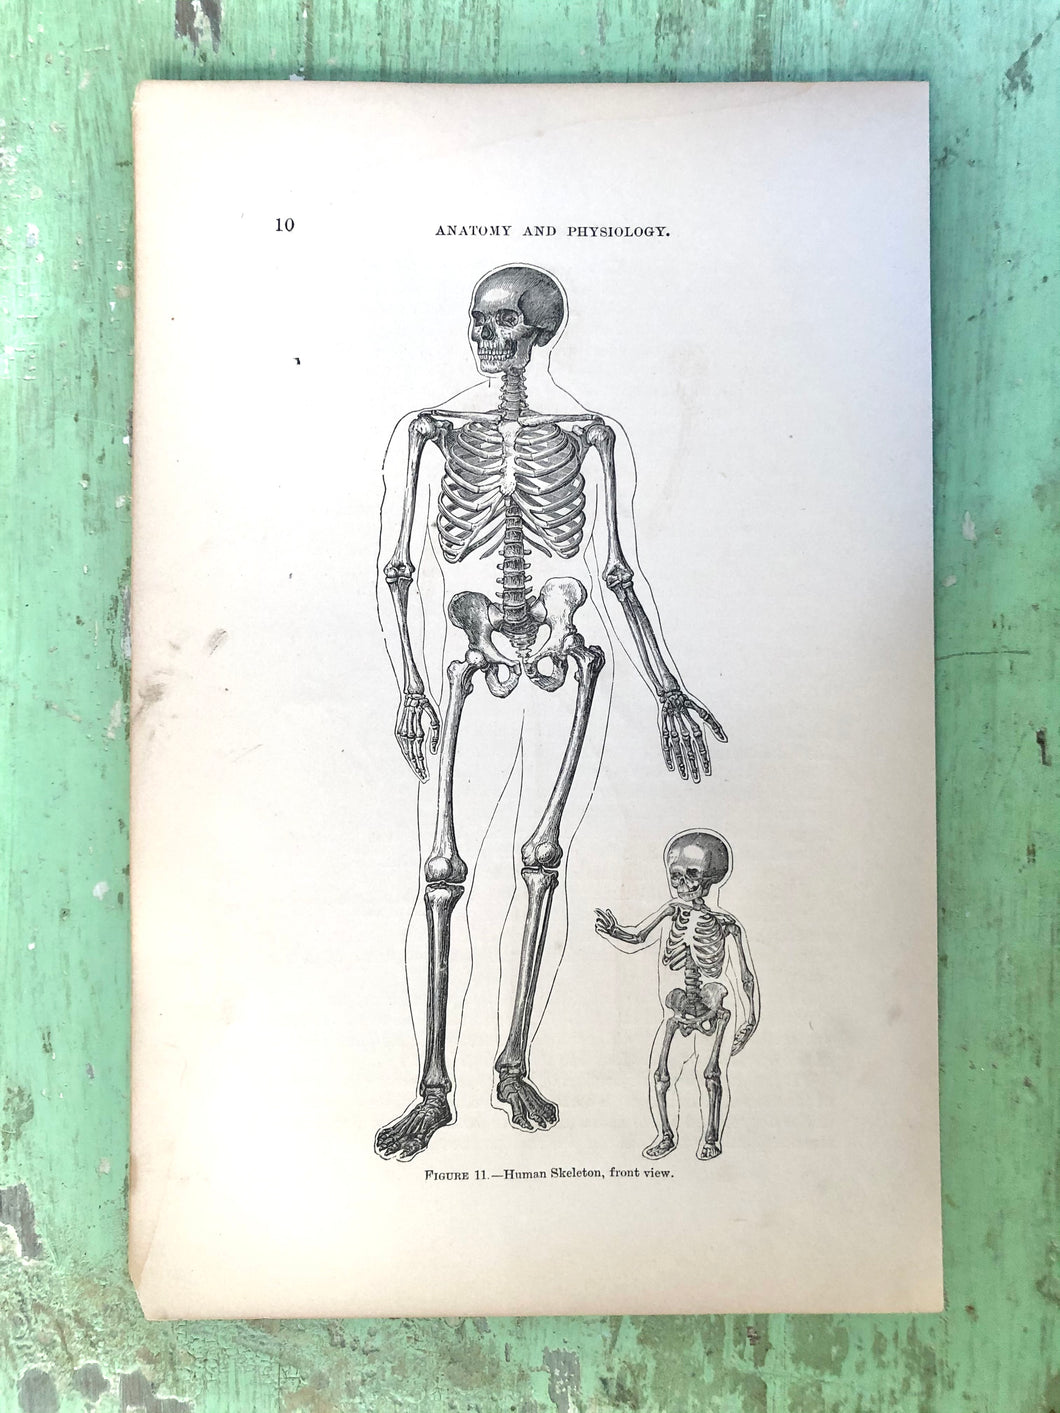 Print from “Wood’s Household Practice of Medicine, Hygeine and Surgery, Vol. I”